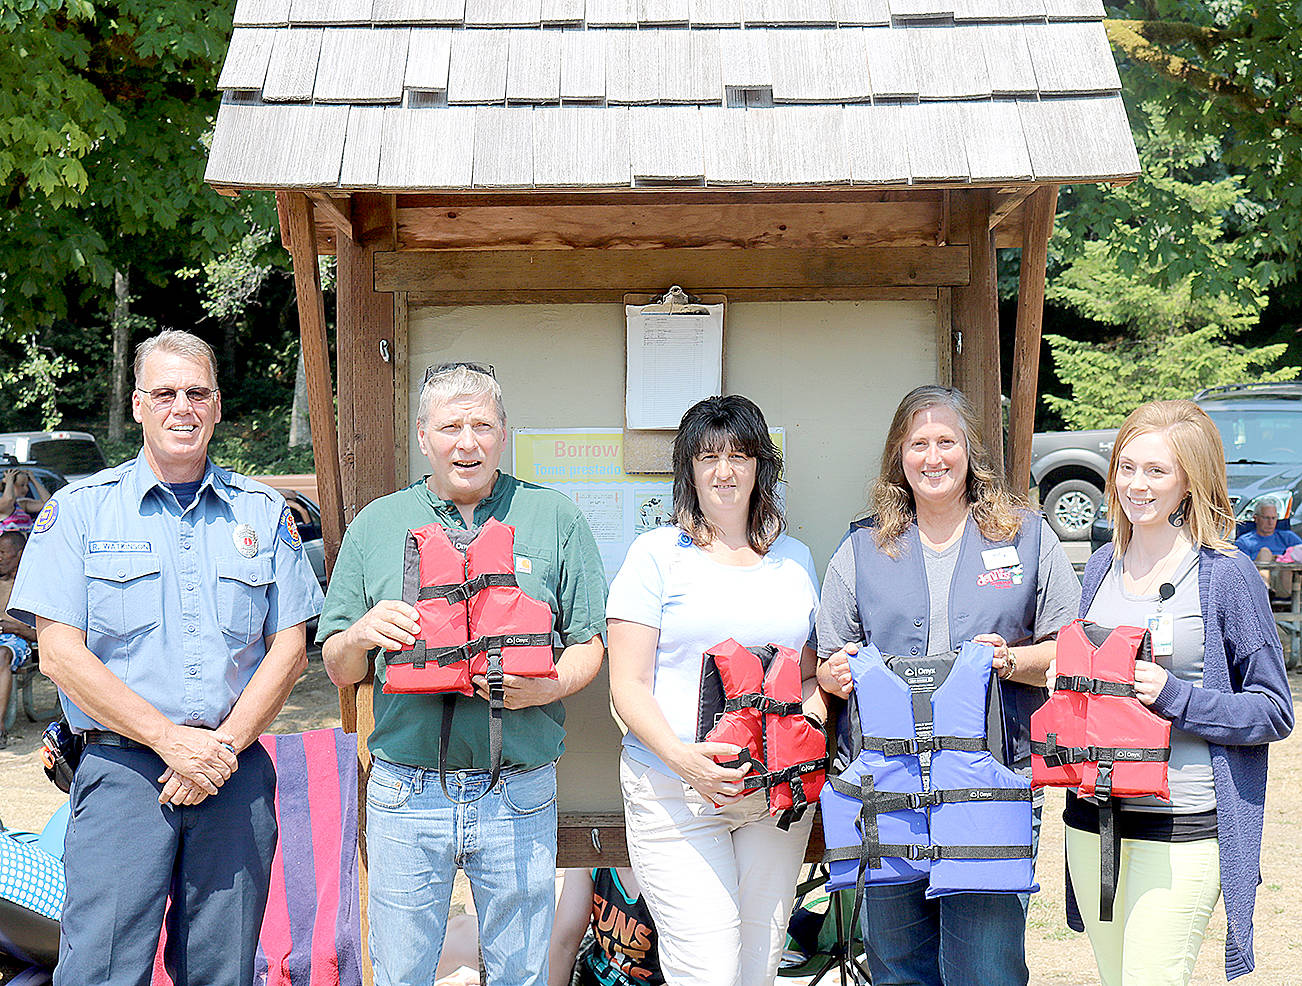 (Travis Rains | The Vidette) The Montesano Fire Department, Montesano Health and Rehabilitation Center and Dennis Company, Montesano, came together to provide new life jackets at Lake Sylvia in an effort to promote safety. From left: Lt. Rick Watkinson of the Montesano Fire Department, Duane Daniels and Amy Clark of the Montesano Health and Rehabilitation Center, Manager of Dennis Company, Montesano Janette Romine and Willow Benner of the Montesano Health and Rehabilitation Center.